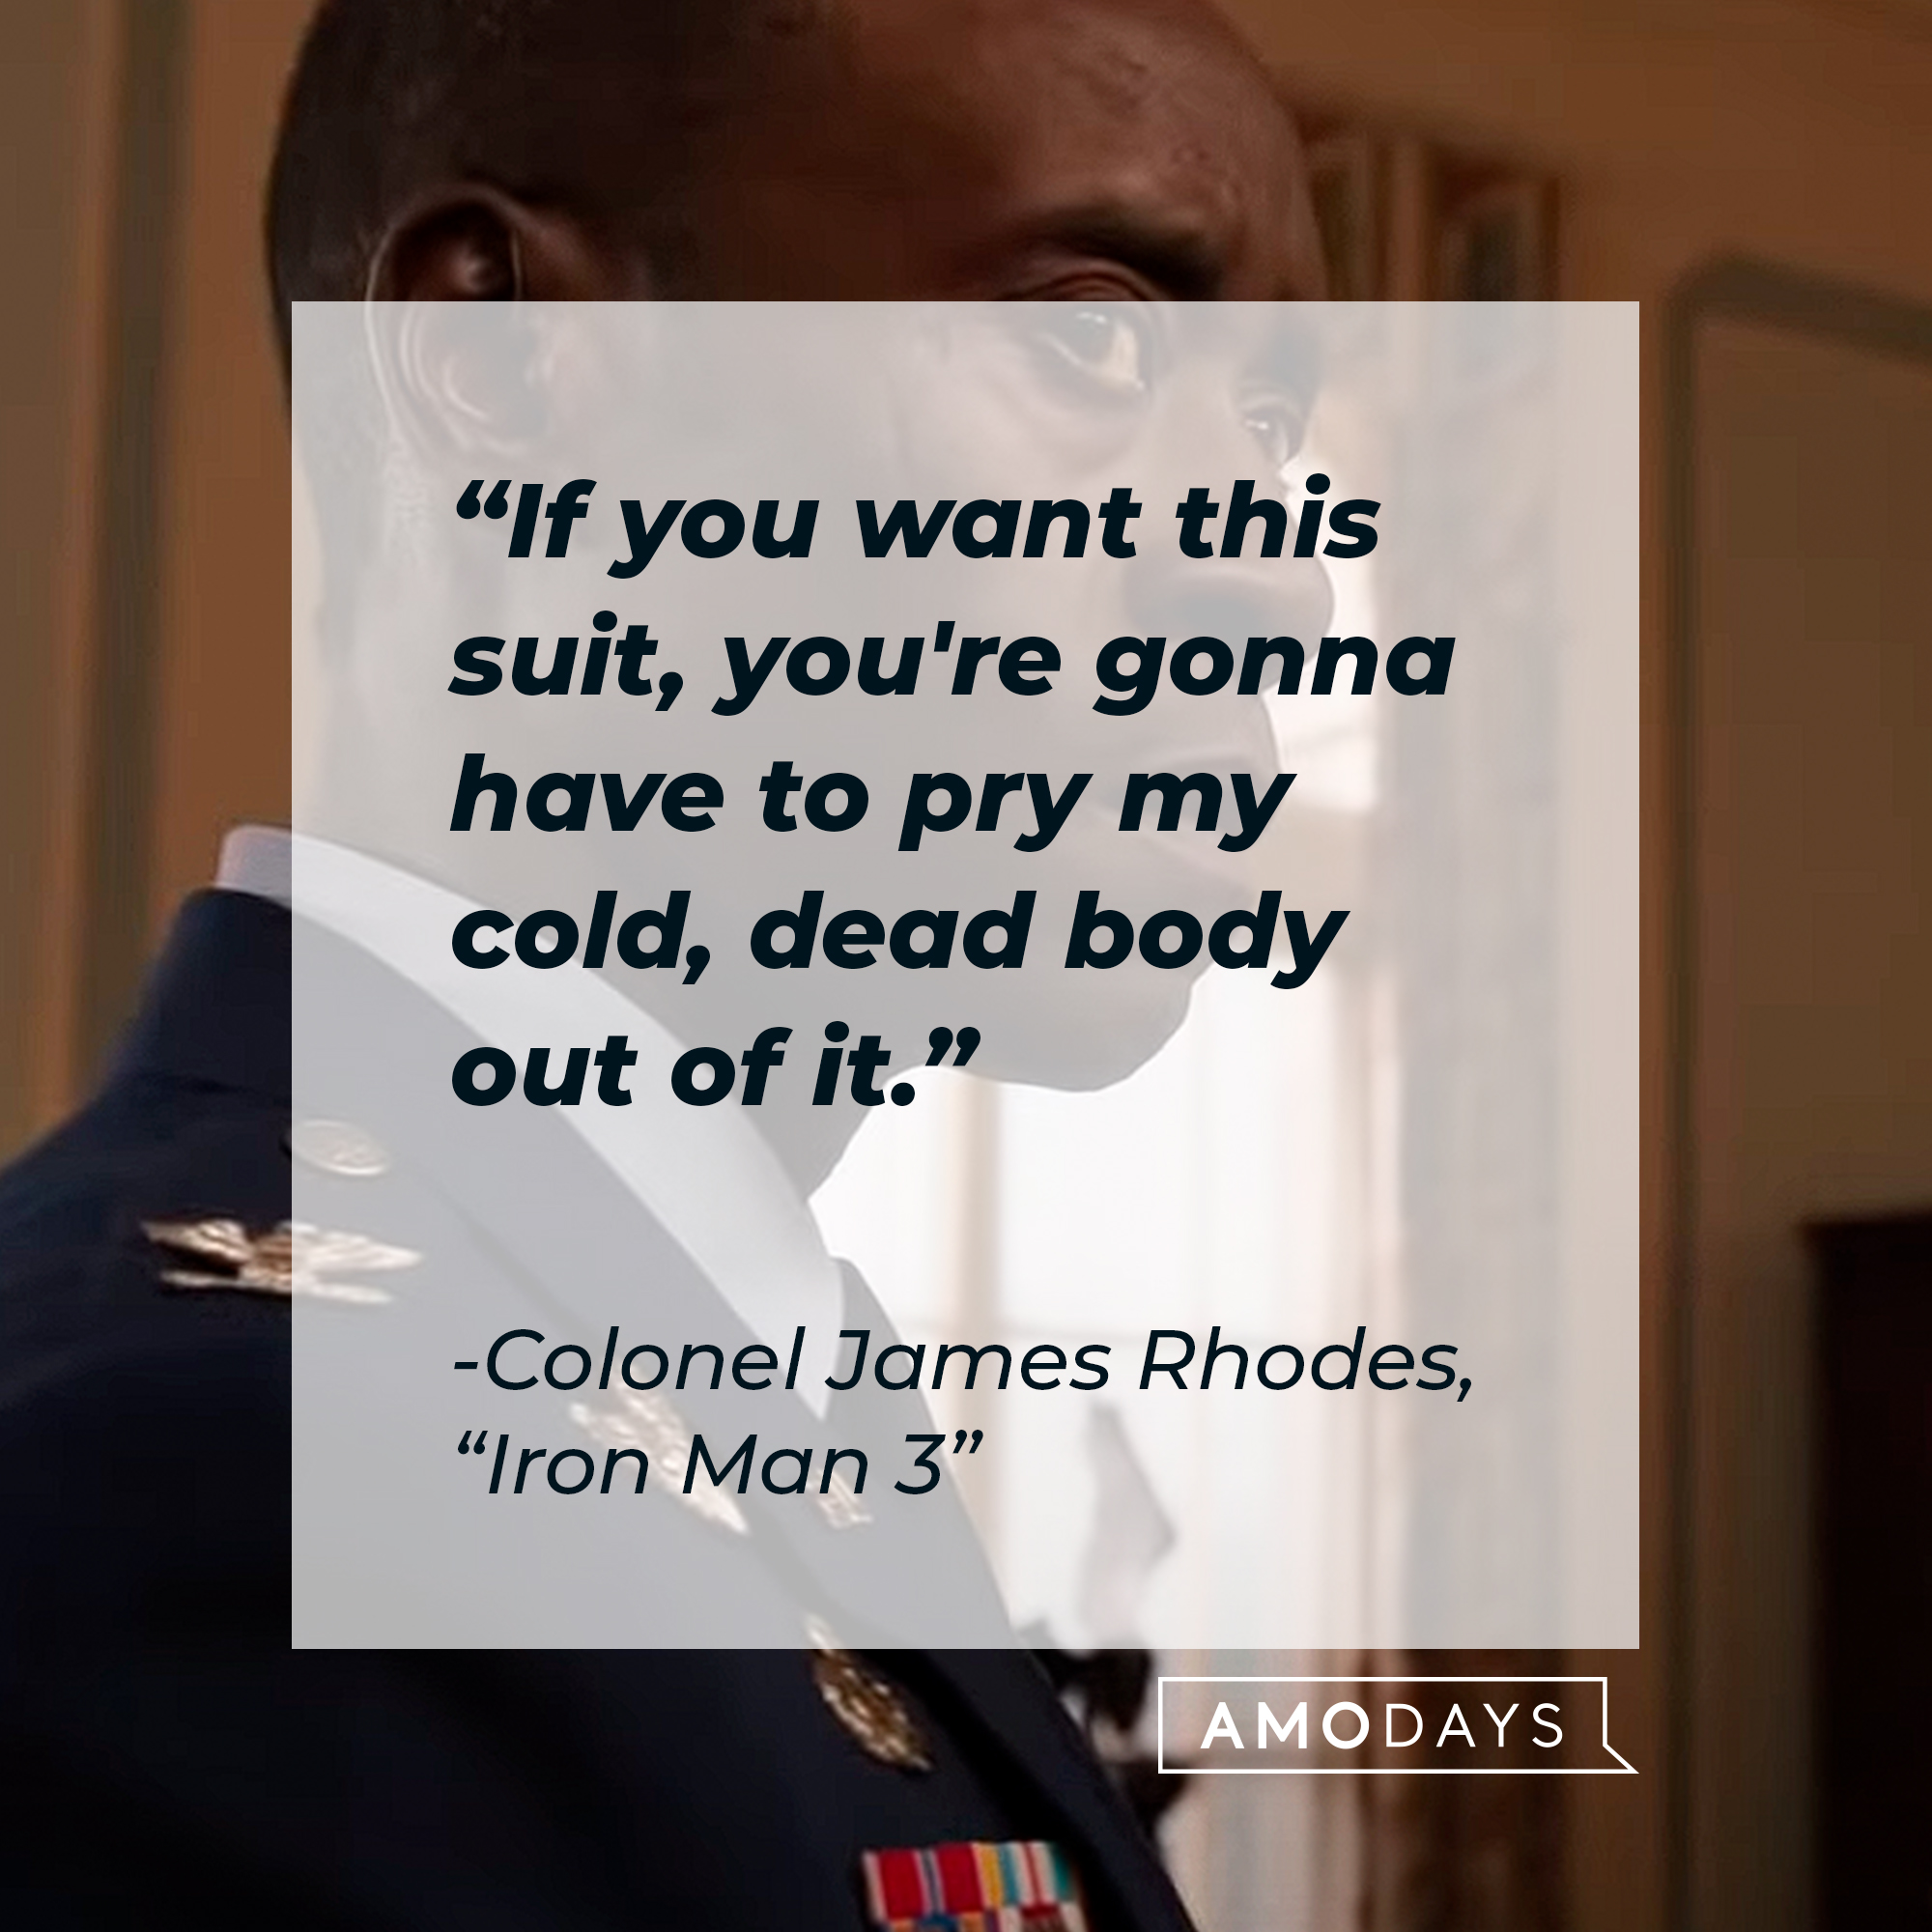 Colonel James Rhode’s quote: "If you want this suit, you're gonna have to pry my cold, dead body out of it." | Image: AmoDays